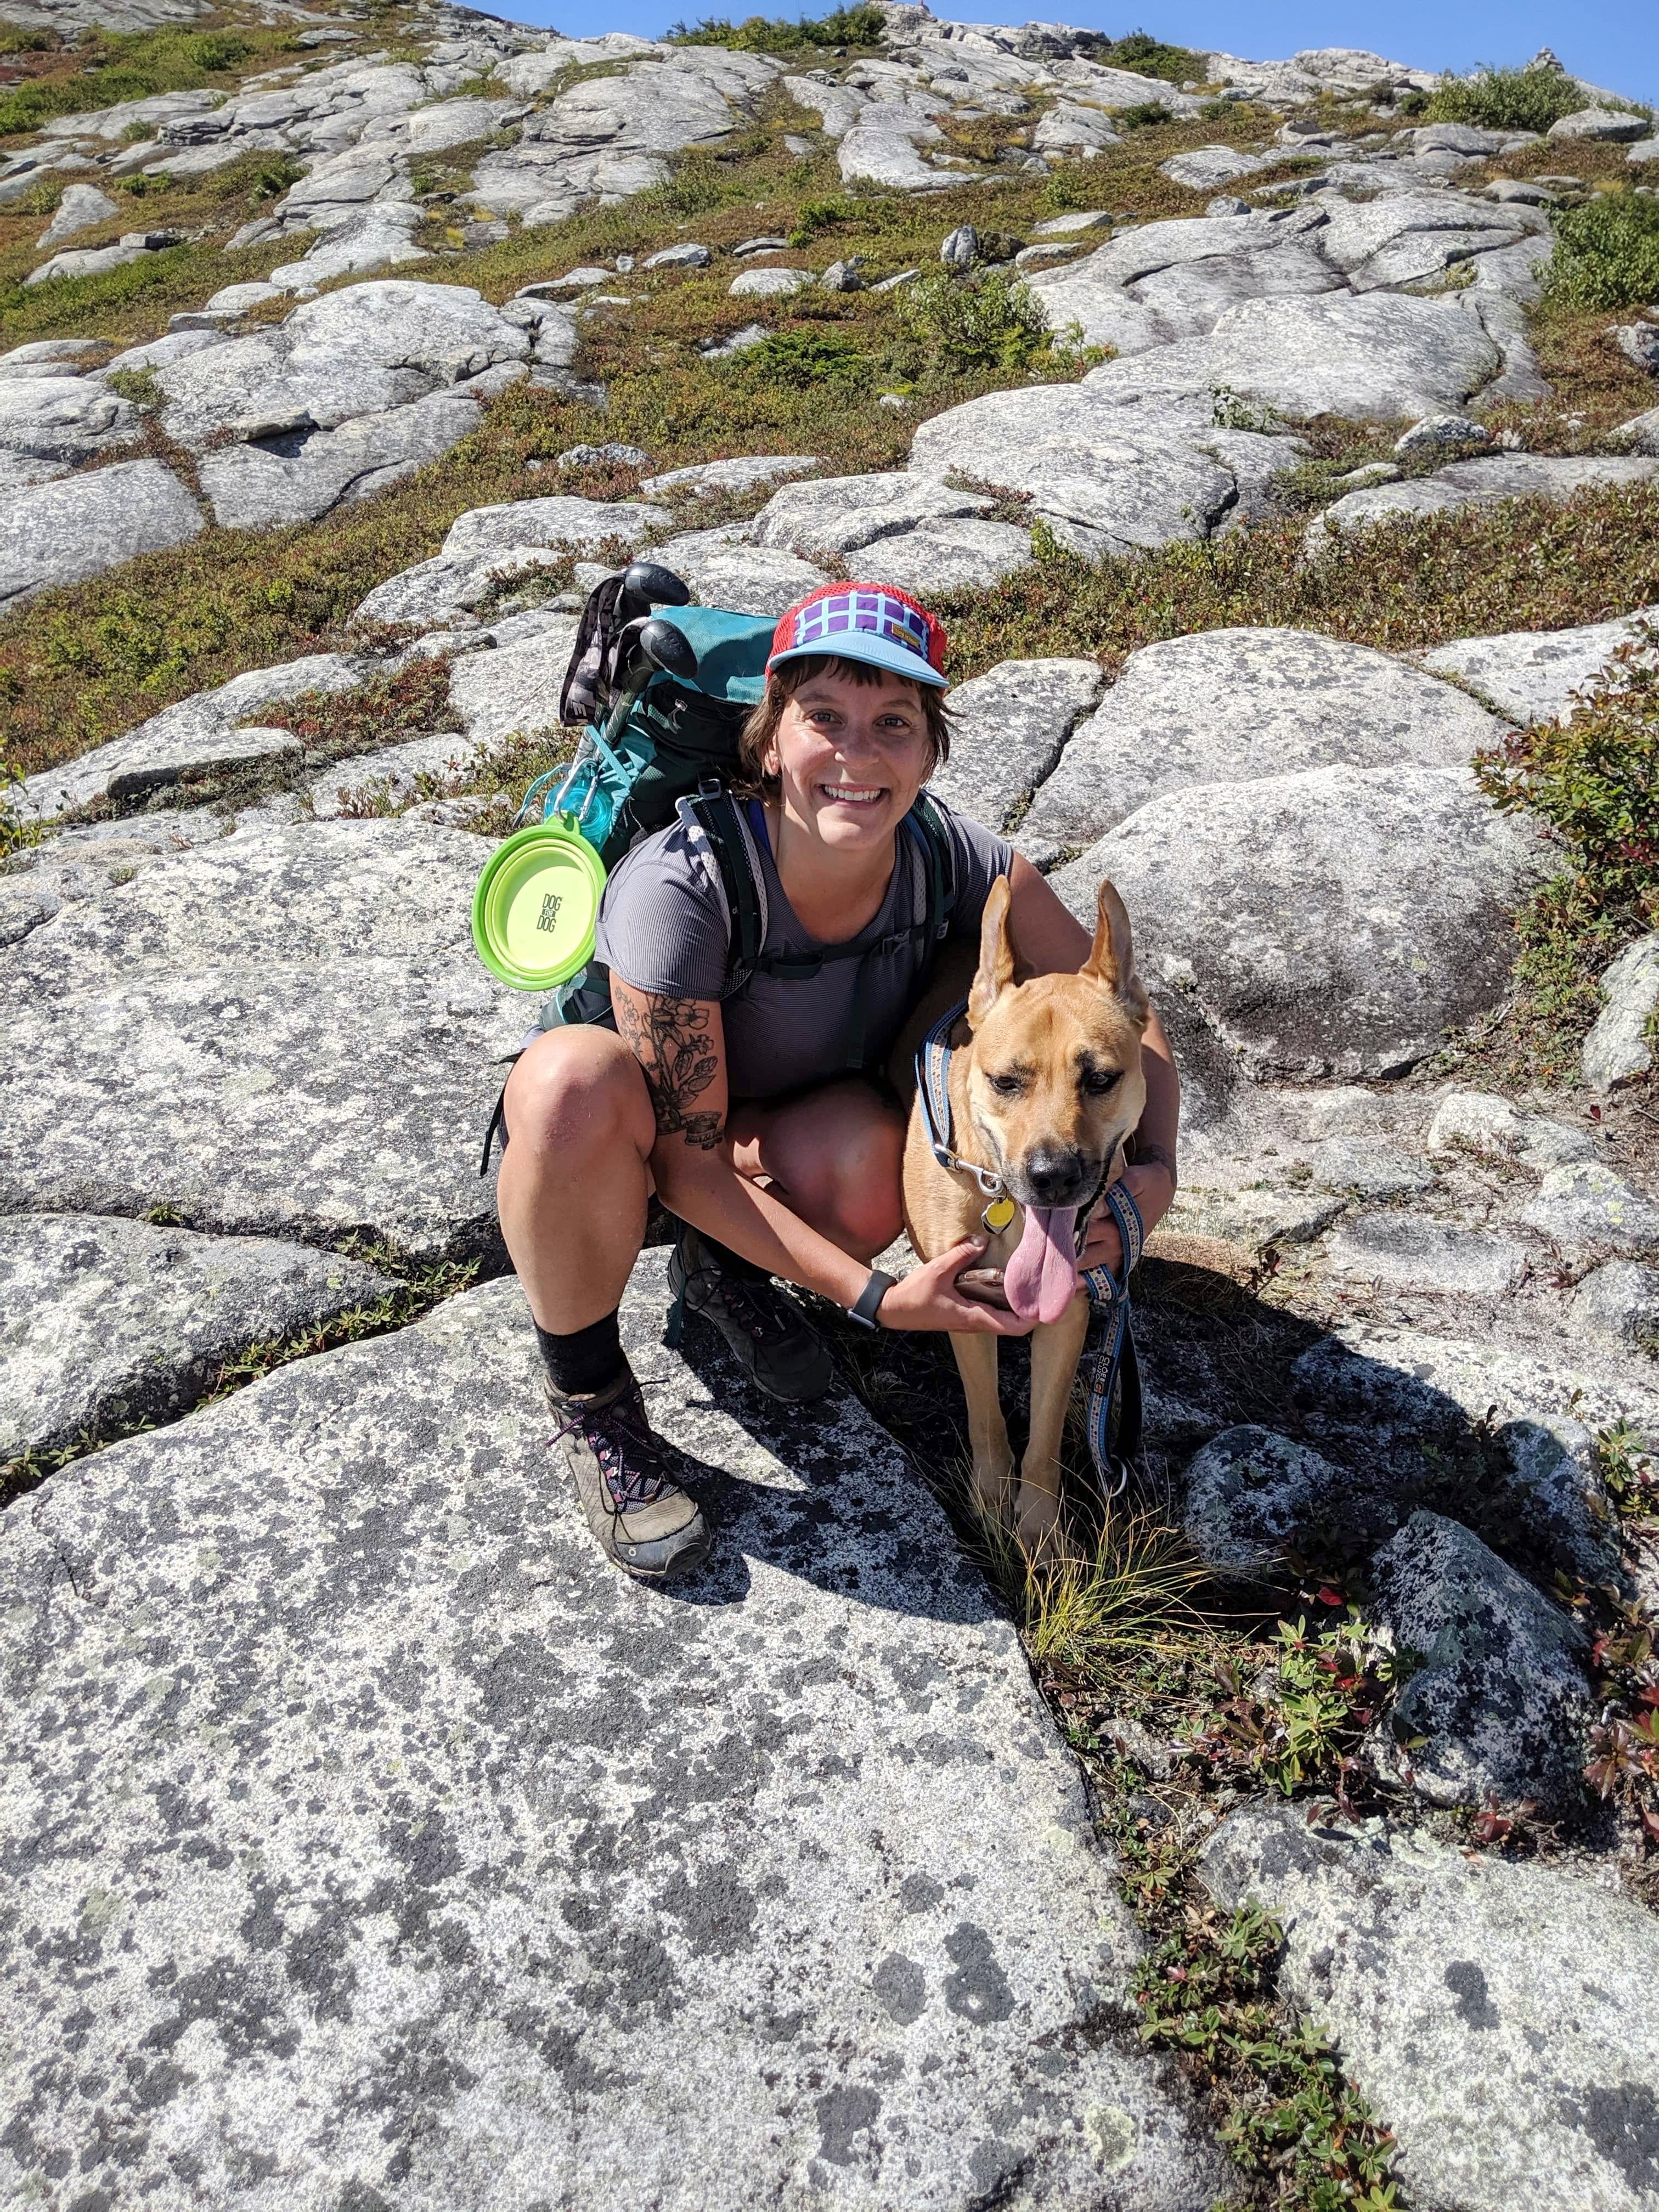 A woman in hiking gear kneeling on a rocky mountain top next to her brown dog.